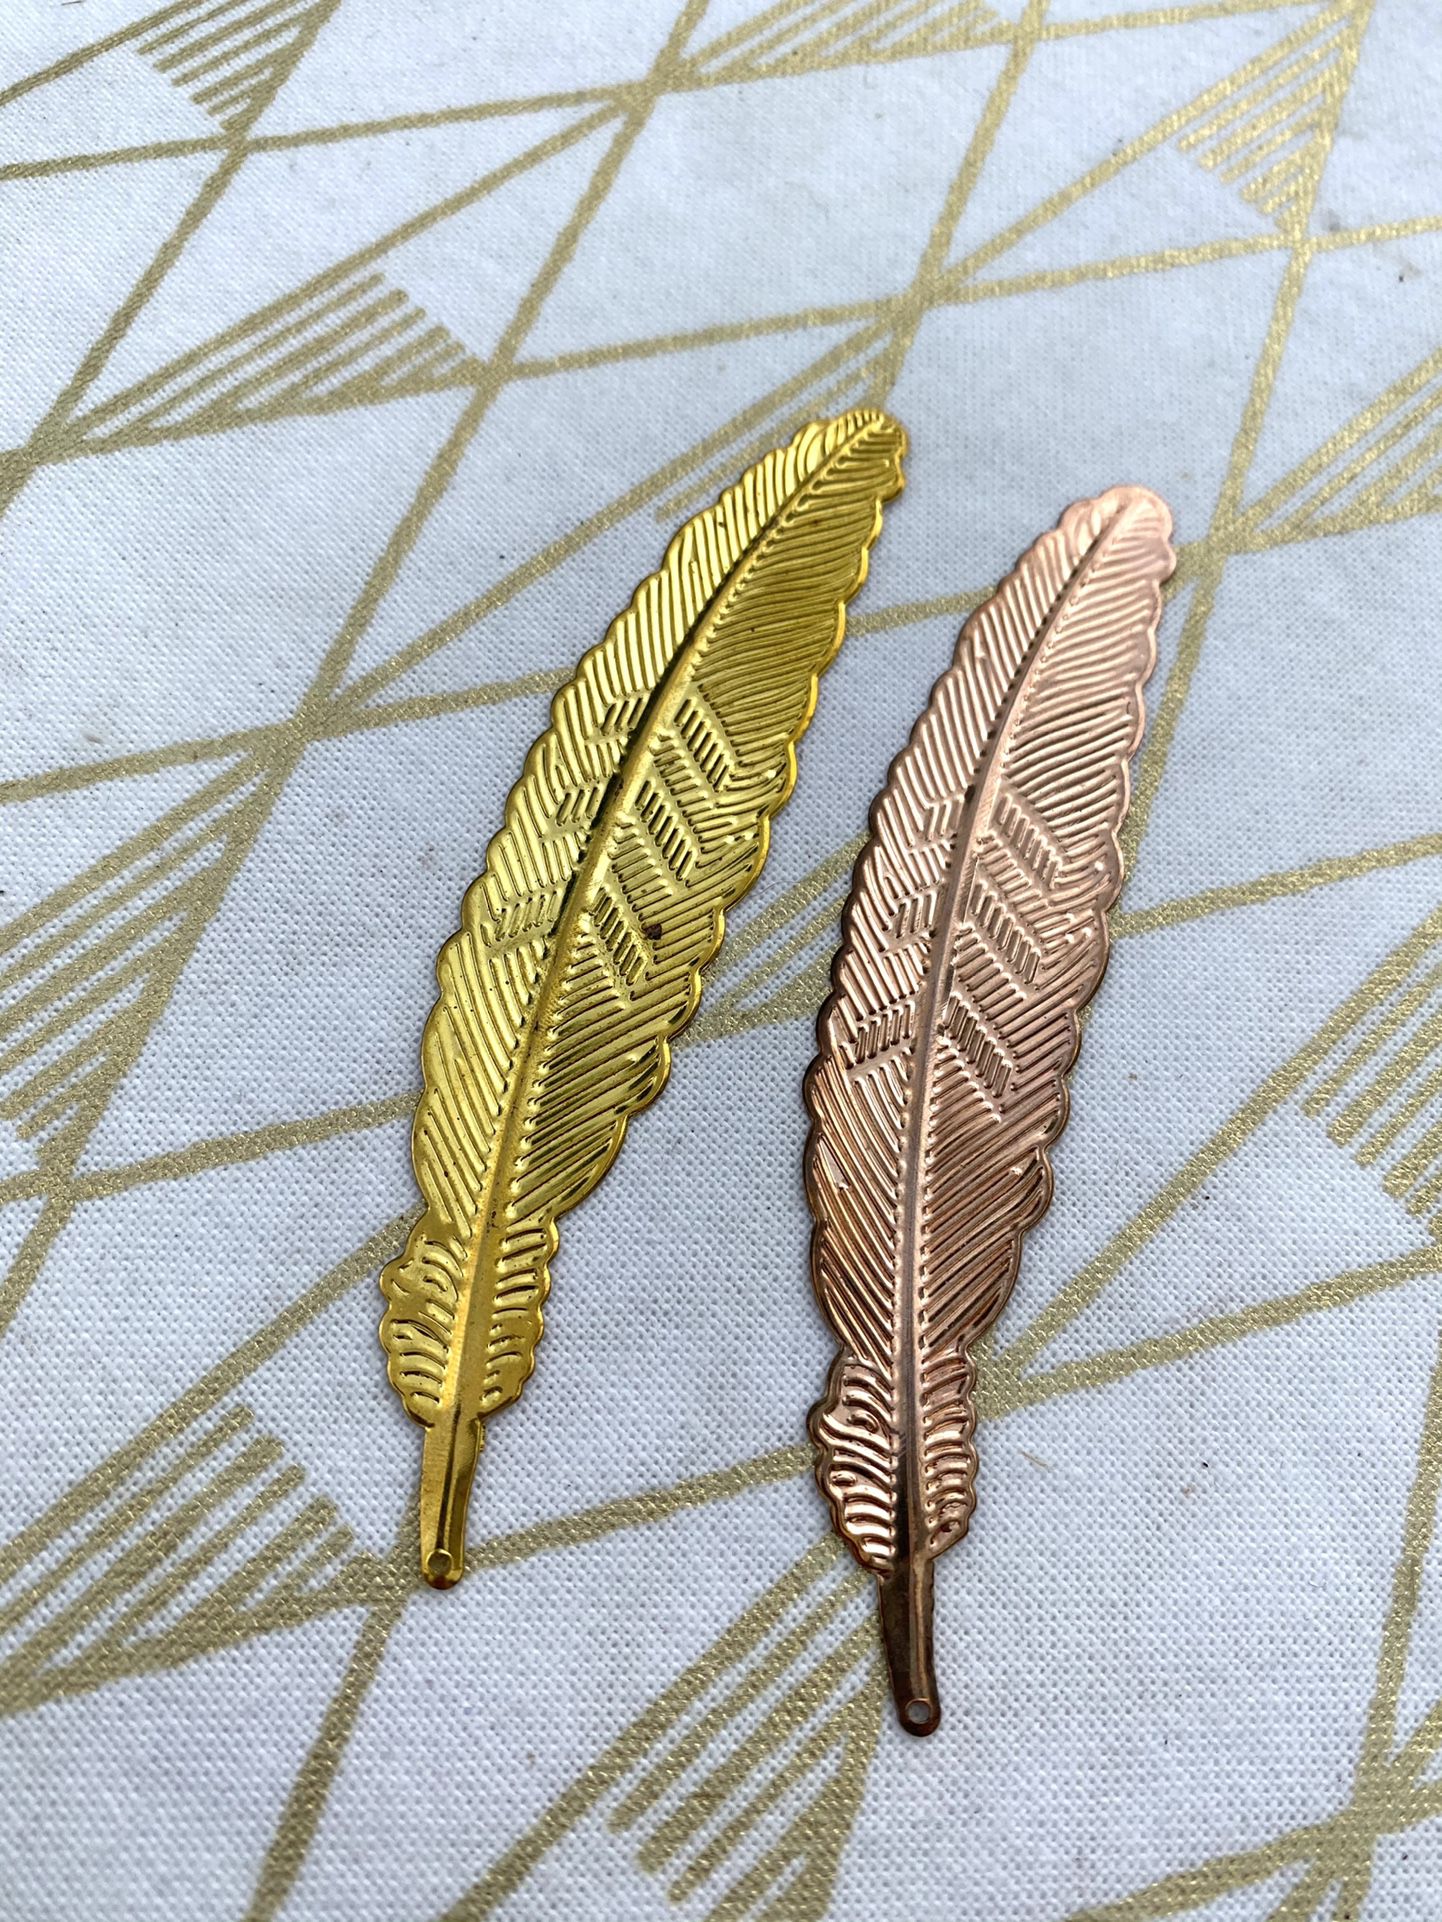 Pair of Metallic Feathers / Crafts Embellishments Duo